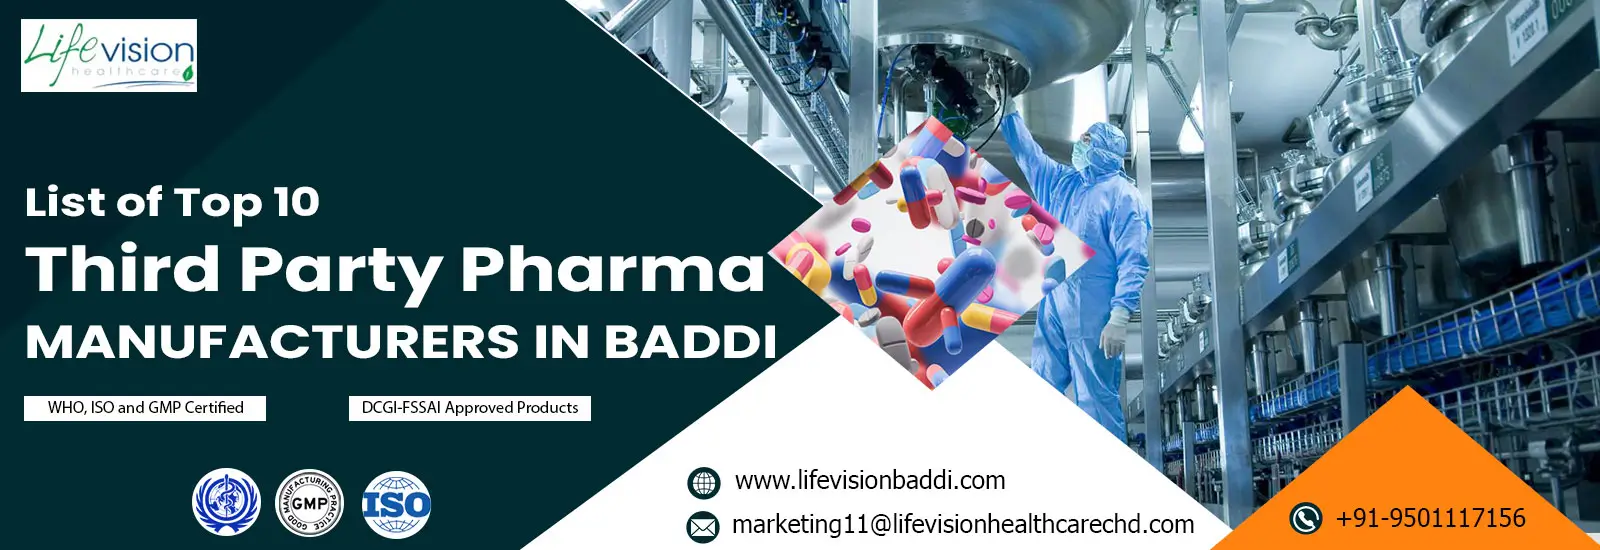 Top 10 Third Party Pharma Manufacturers in Baddi | Lifevision Healthcare